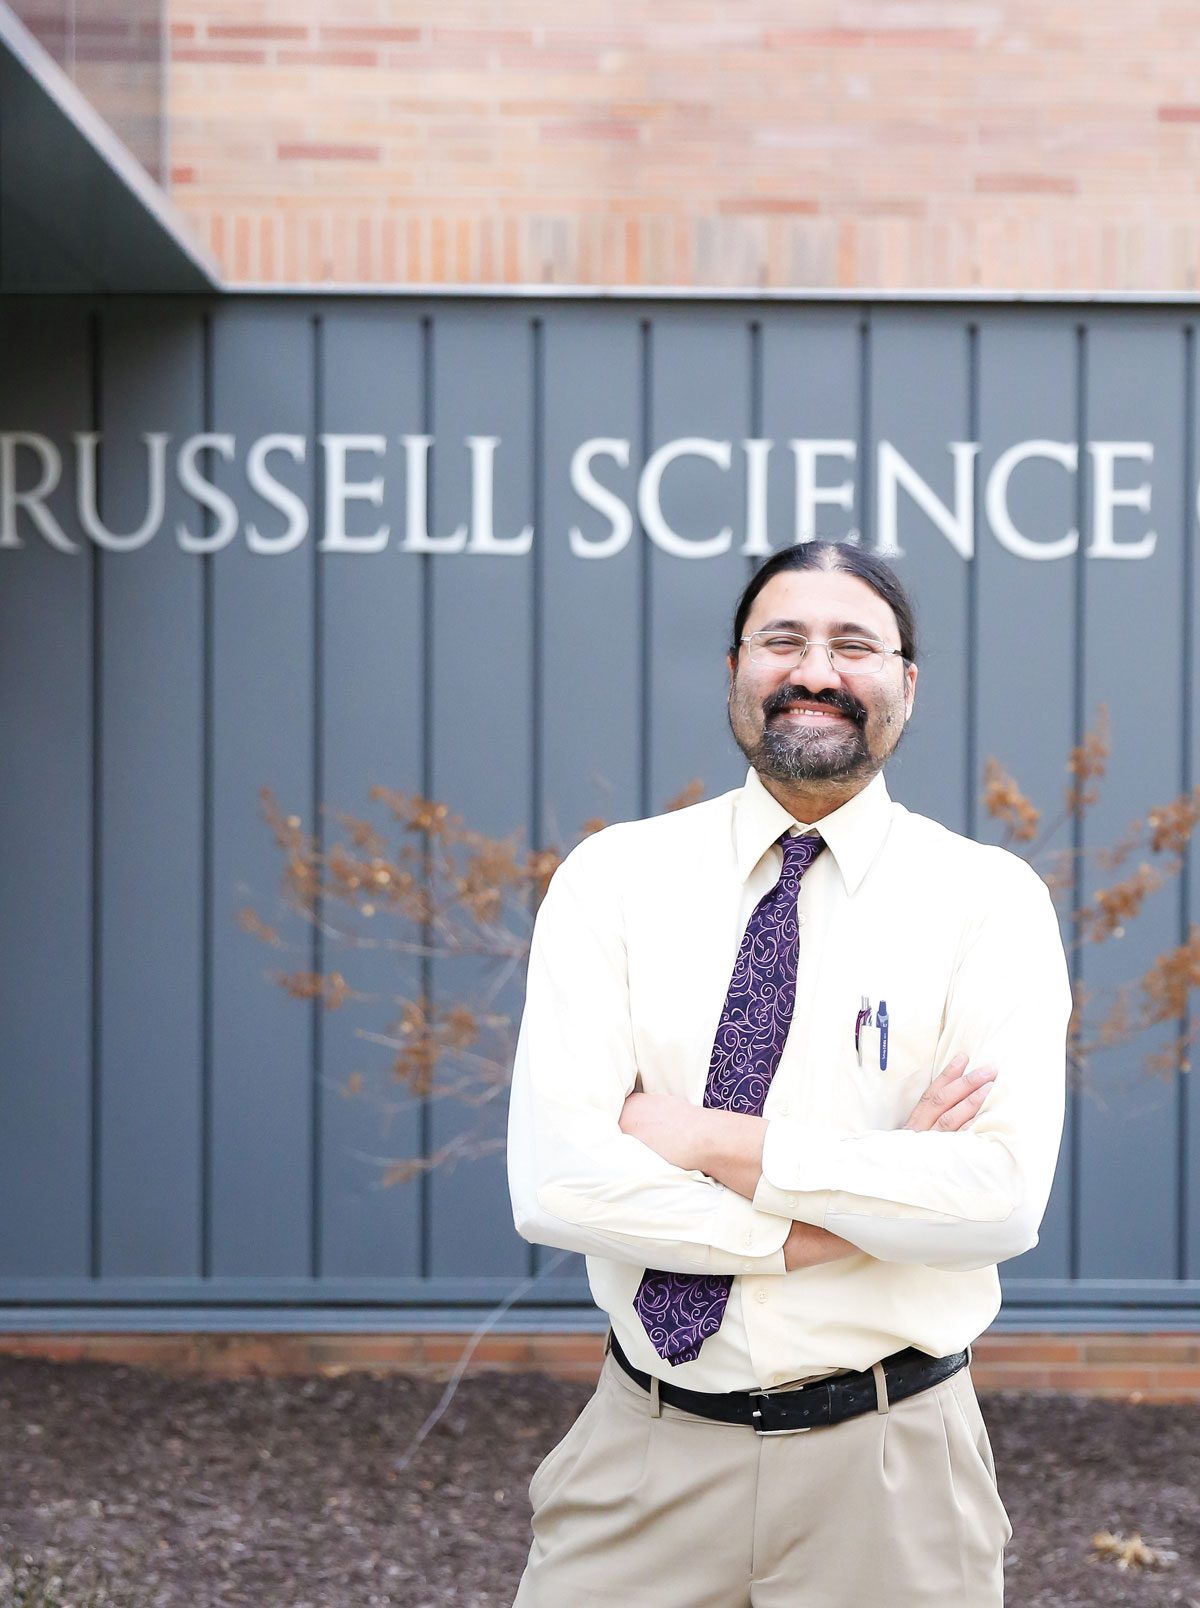 Jai Shanata ’05 helped plan the new Russell Science Center, where he has his office, lab, and classrooms.